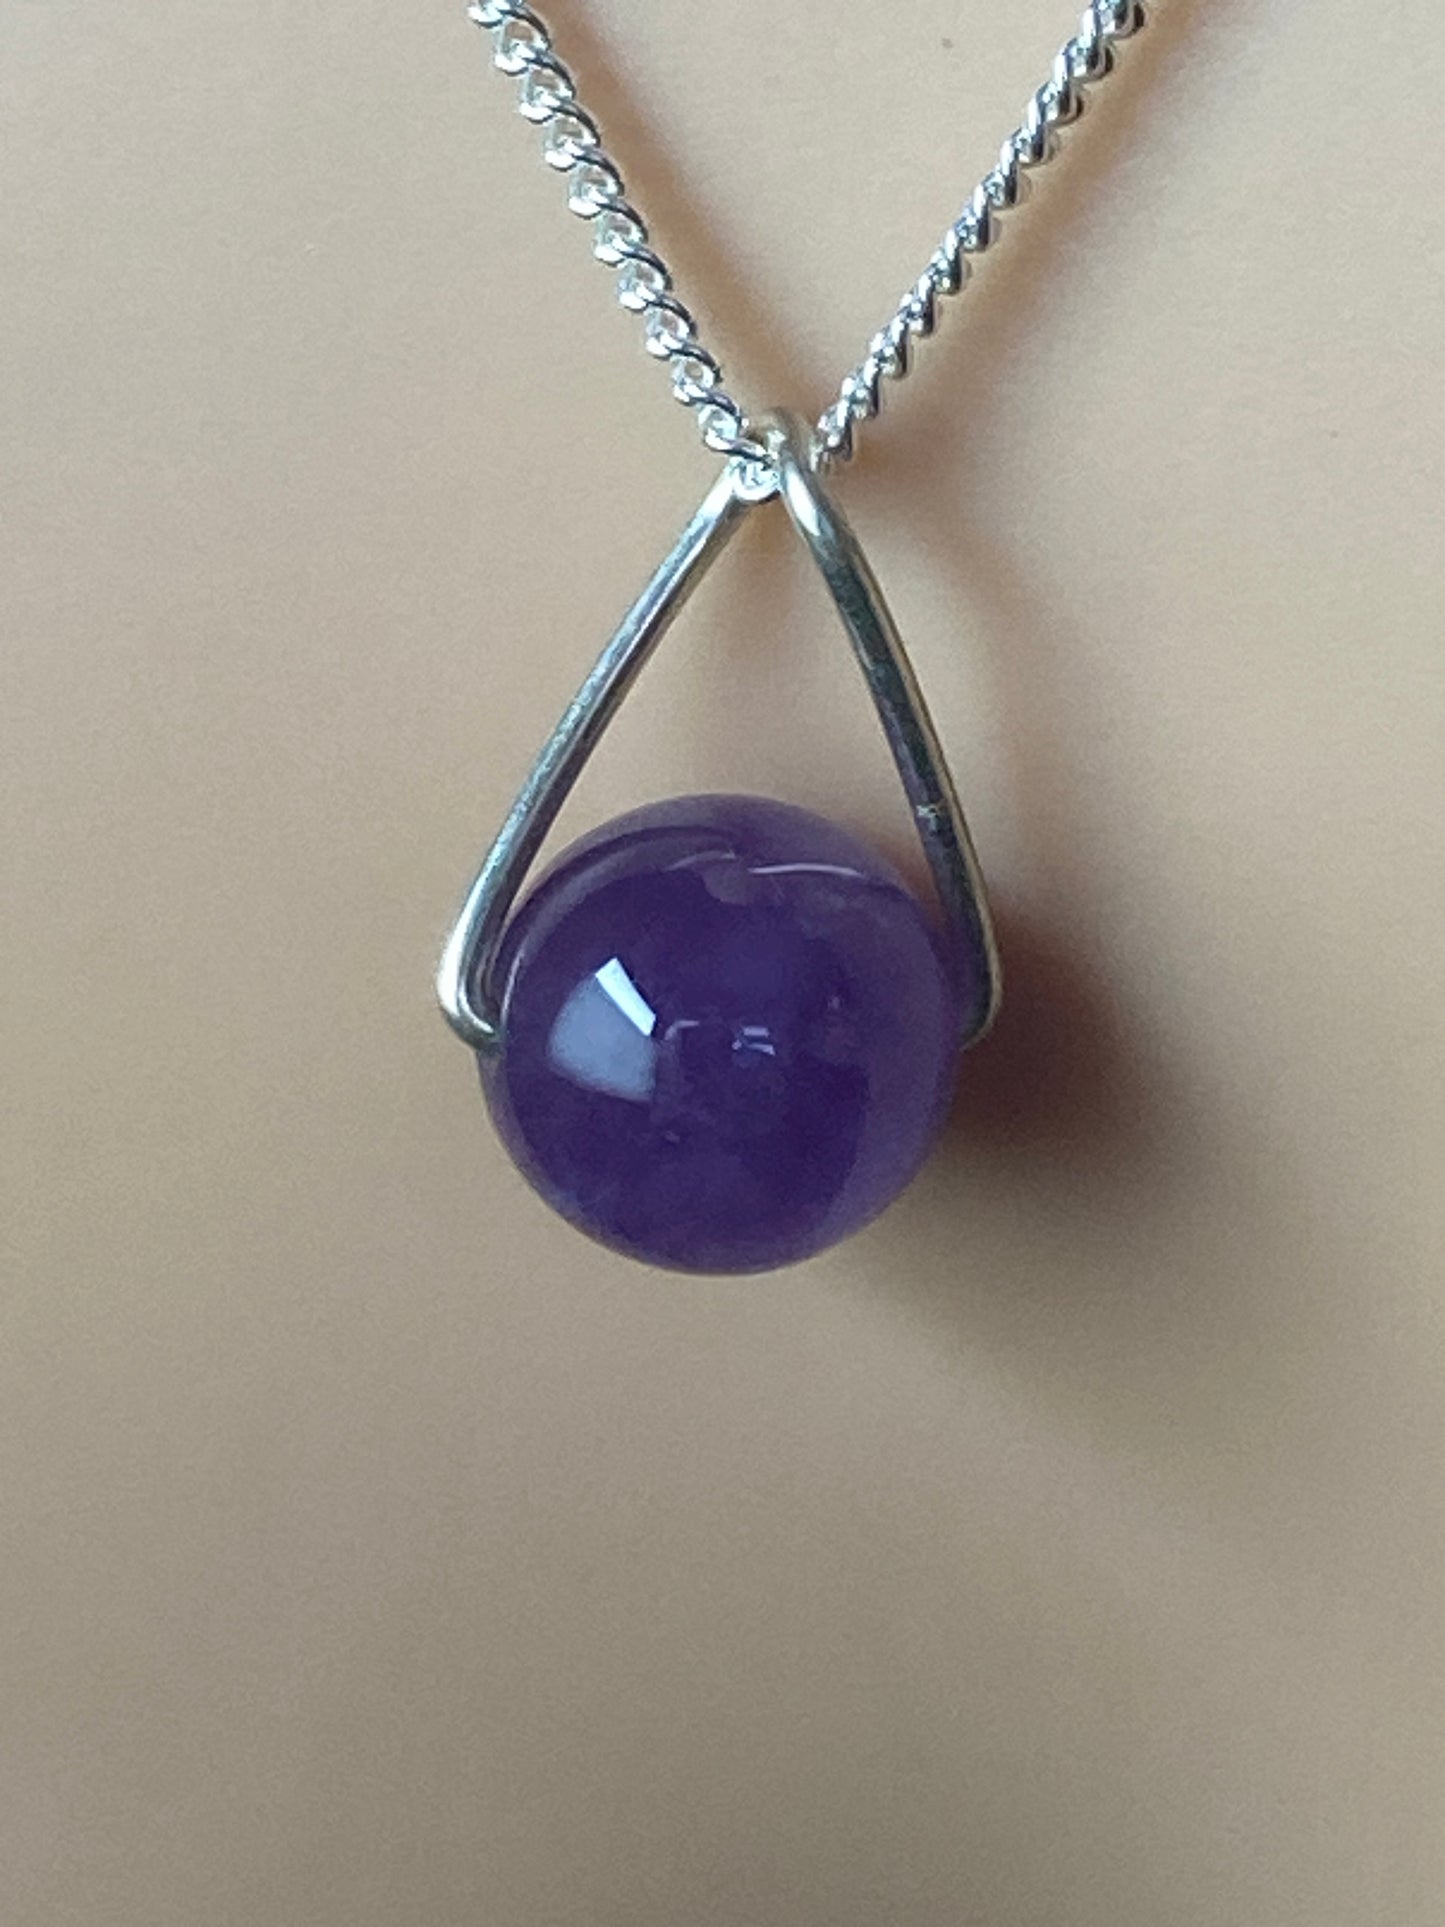 Amethyst necklace, 18” silver chain